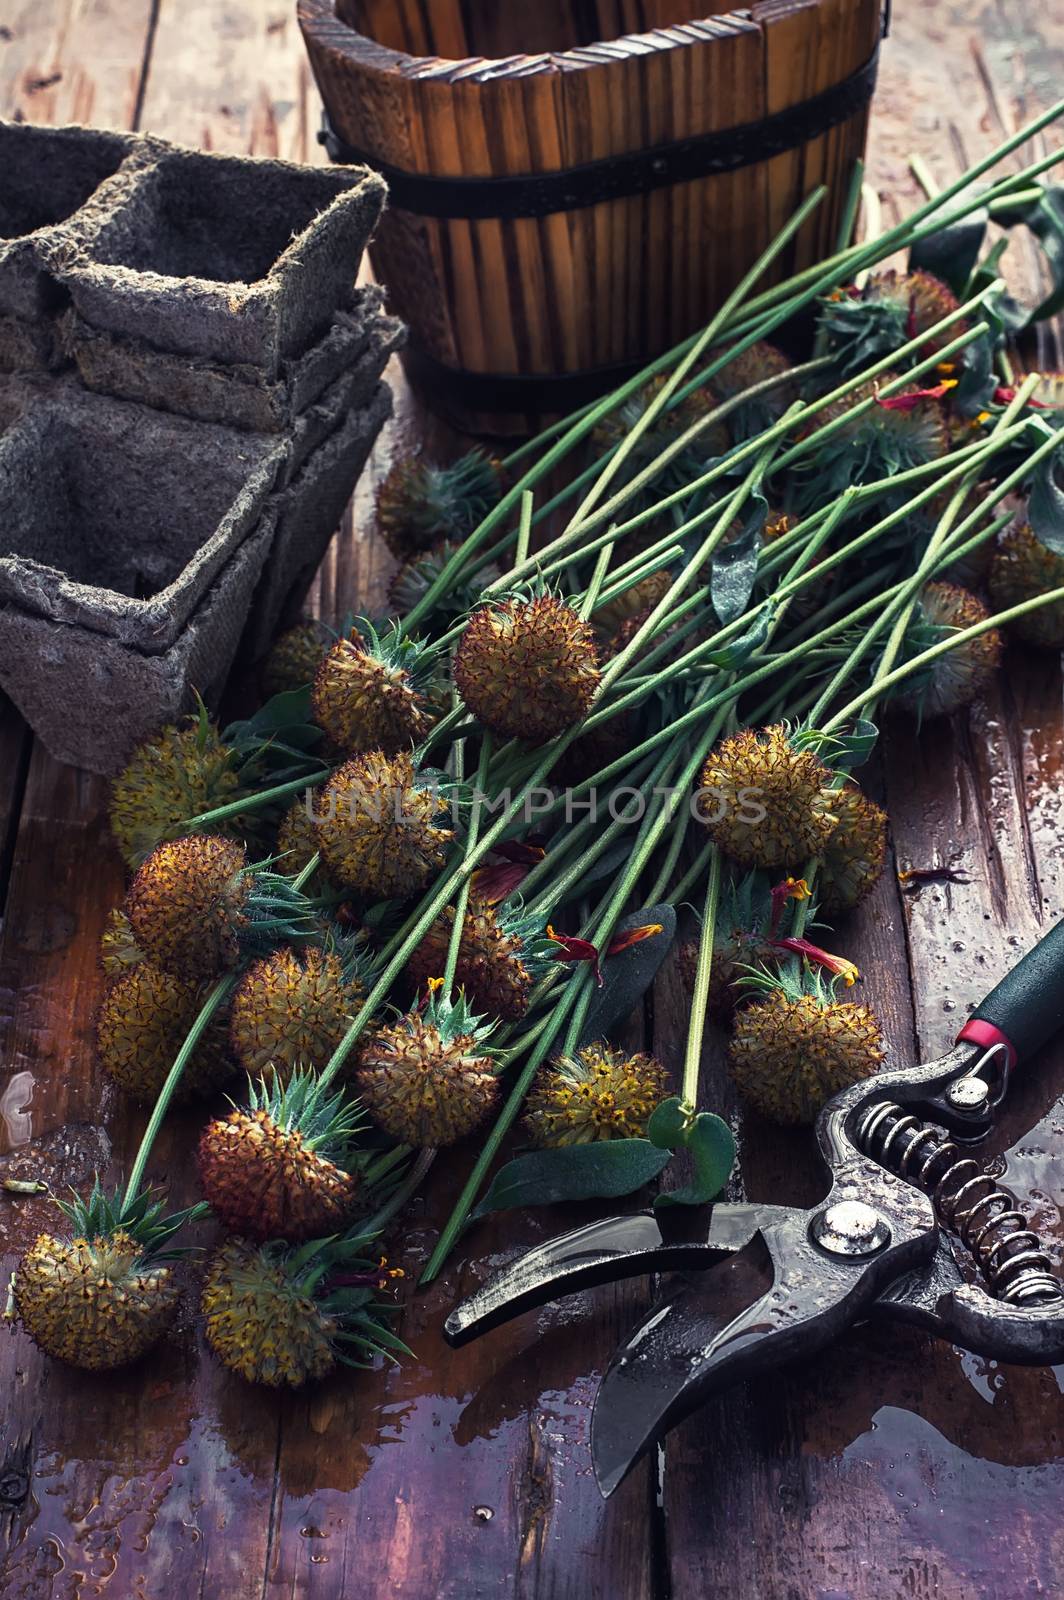 sheaf of cut plants on the background of secateurs on wooden table